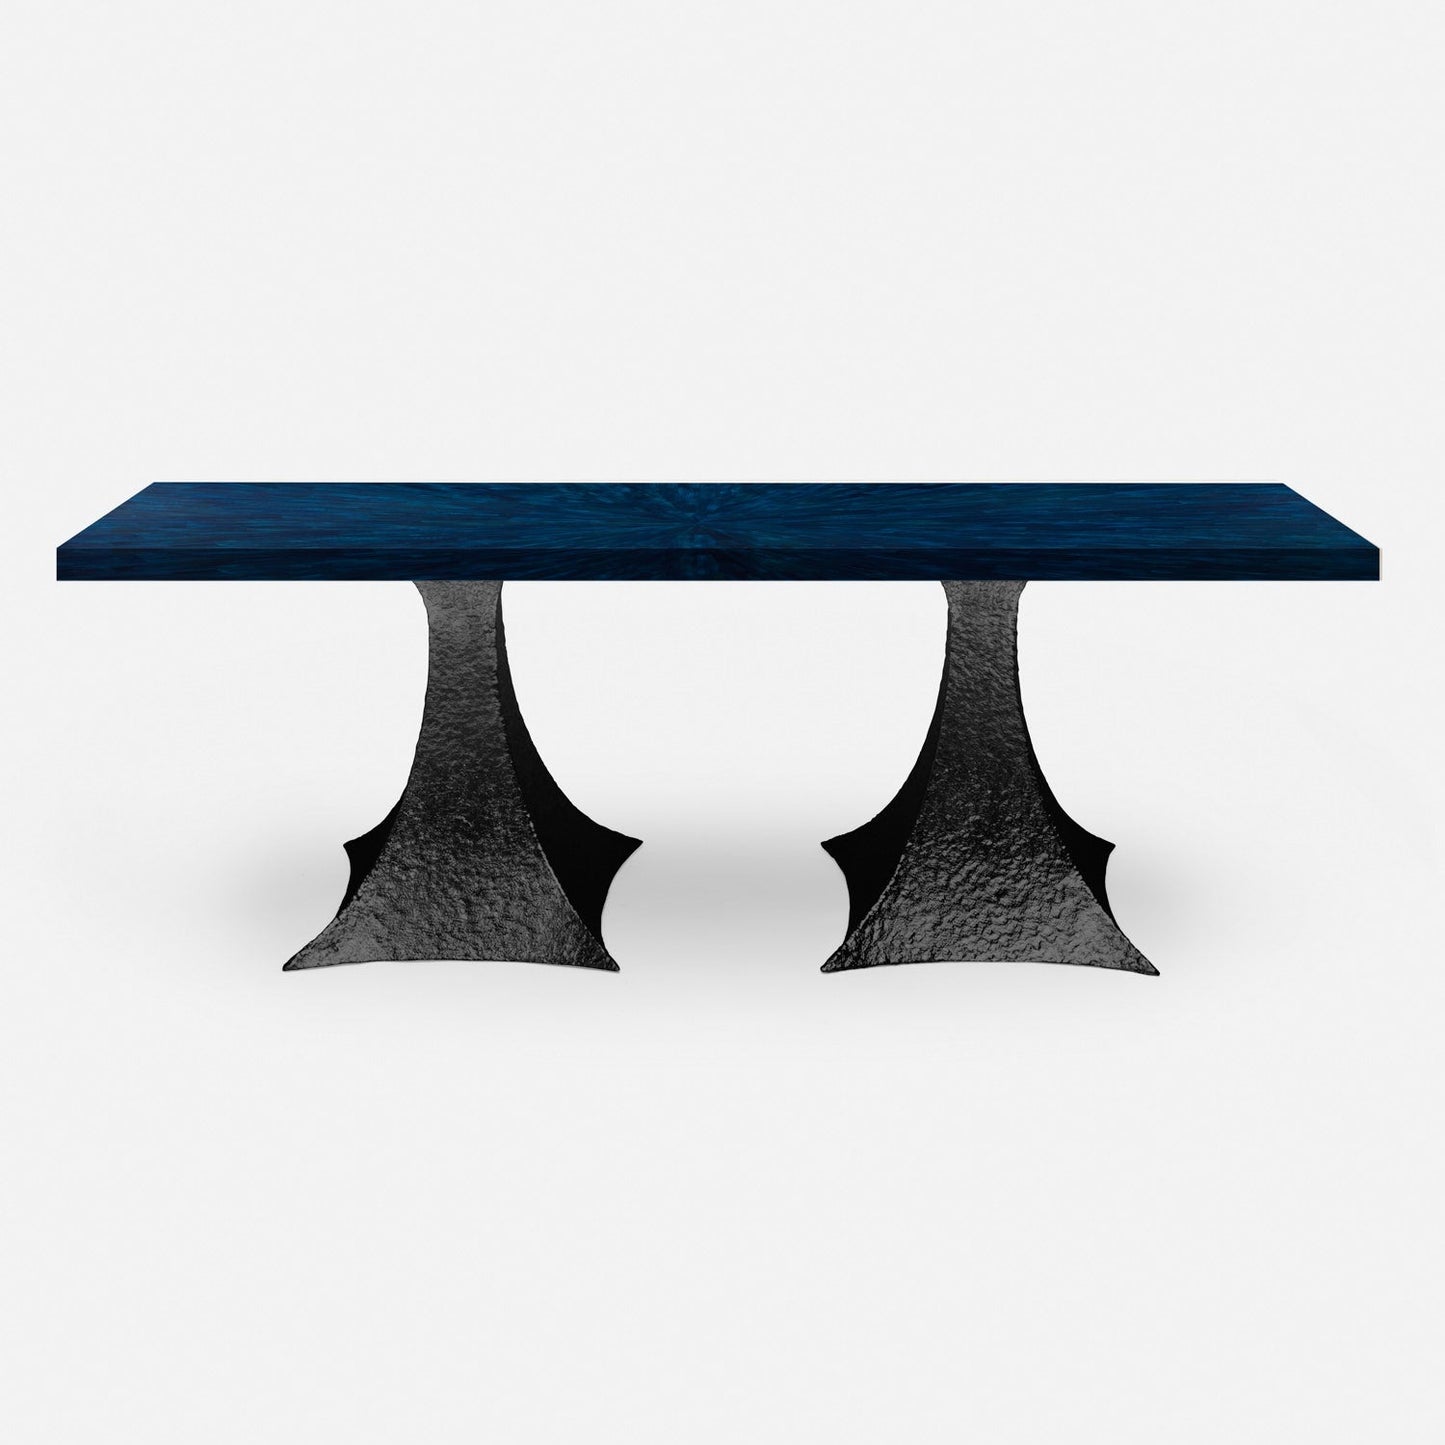 Made Goods Noor 88" x 40" x 30" Bumpy Black Iron Dinning Table With Rectangle White Cerused Oak Table Top